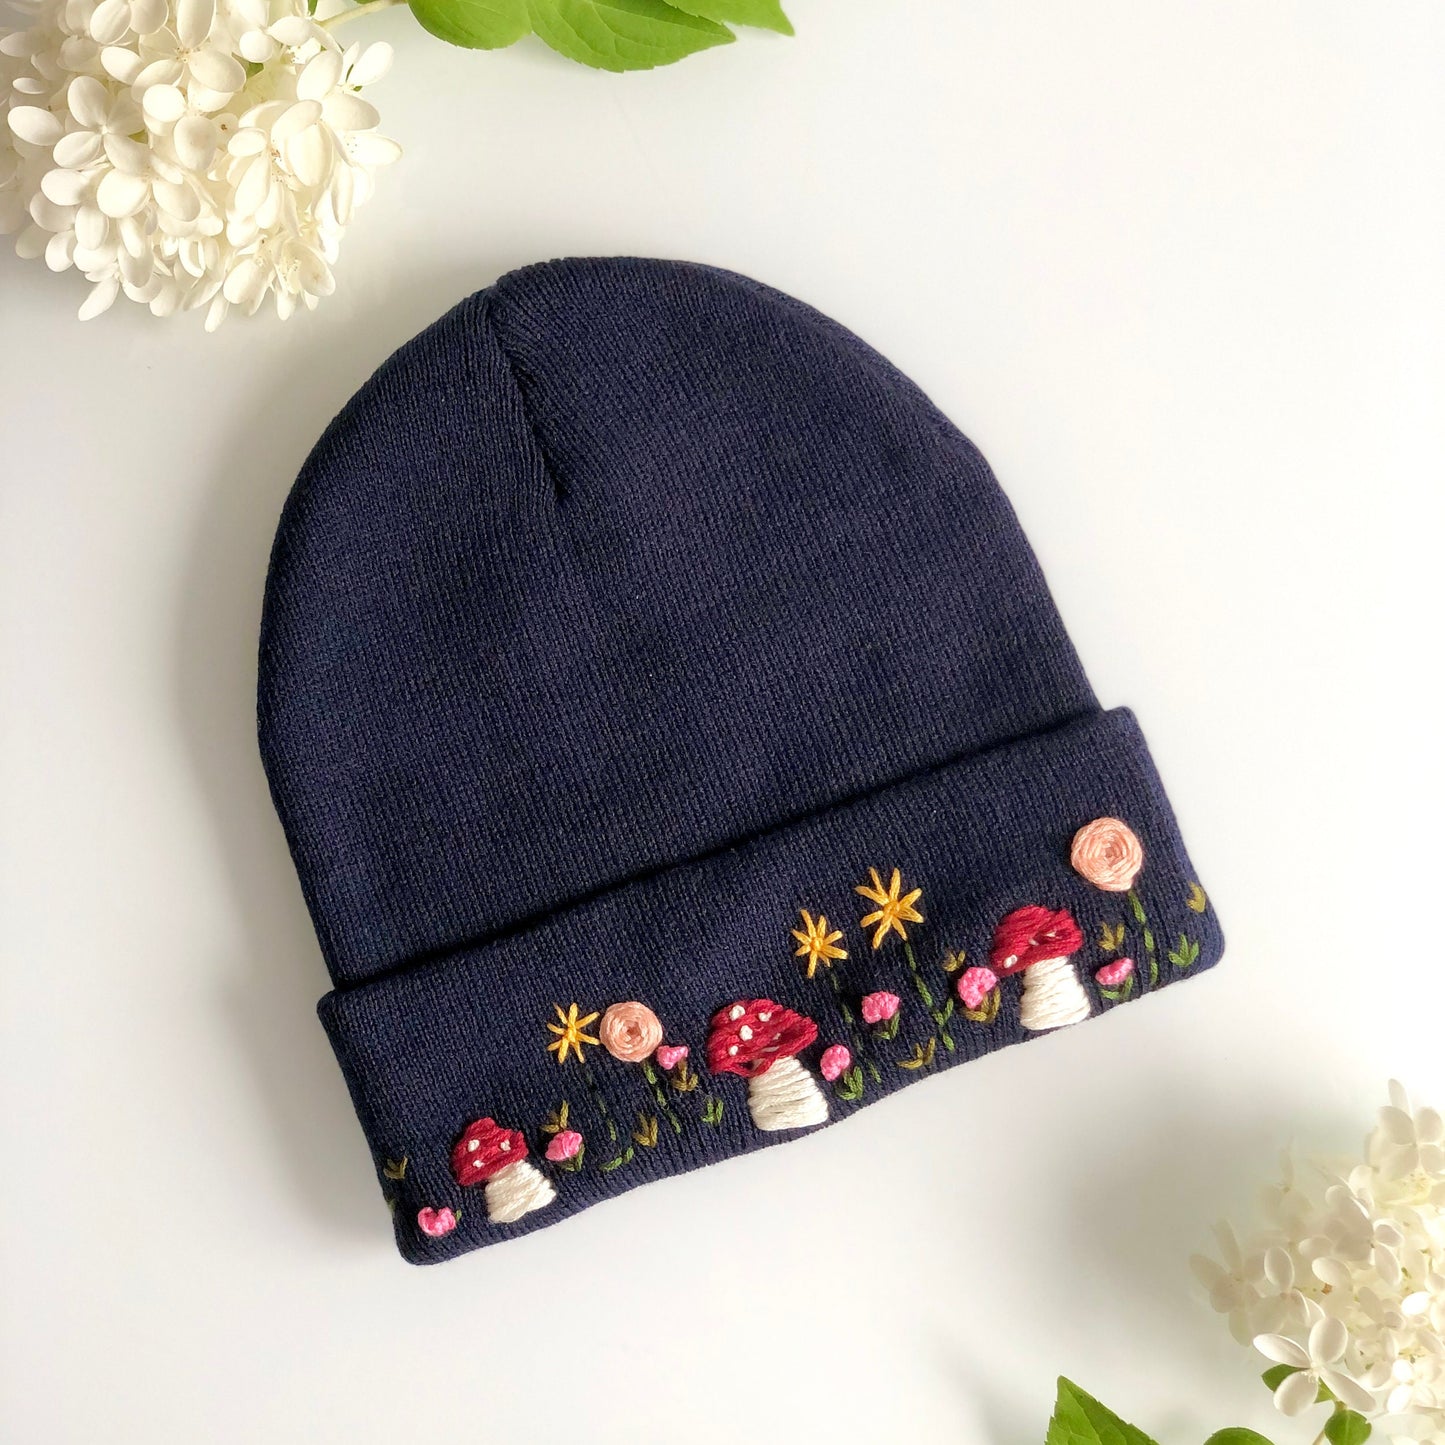 Hand embroidered Beanie, Winter Hat, Plant Hat, Handmade Hat, Mushroom Embroidery